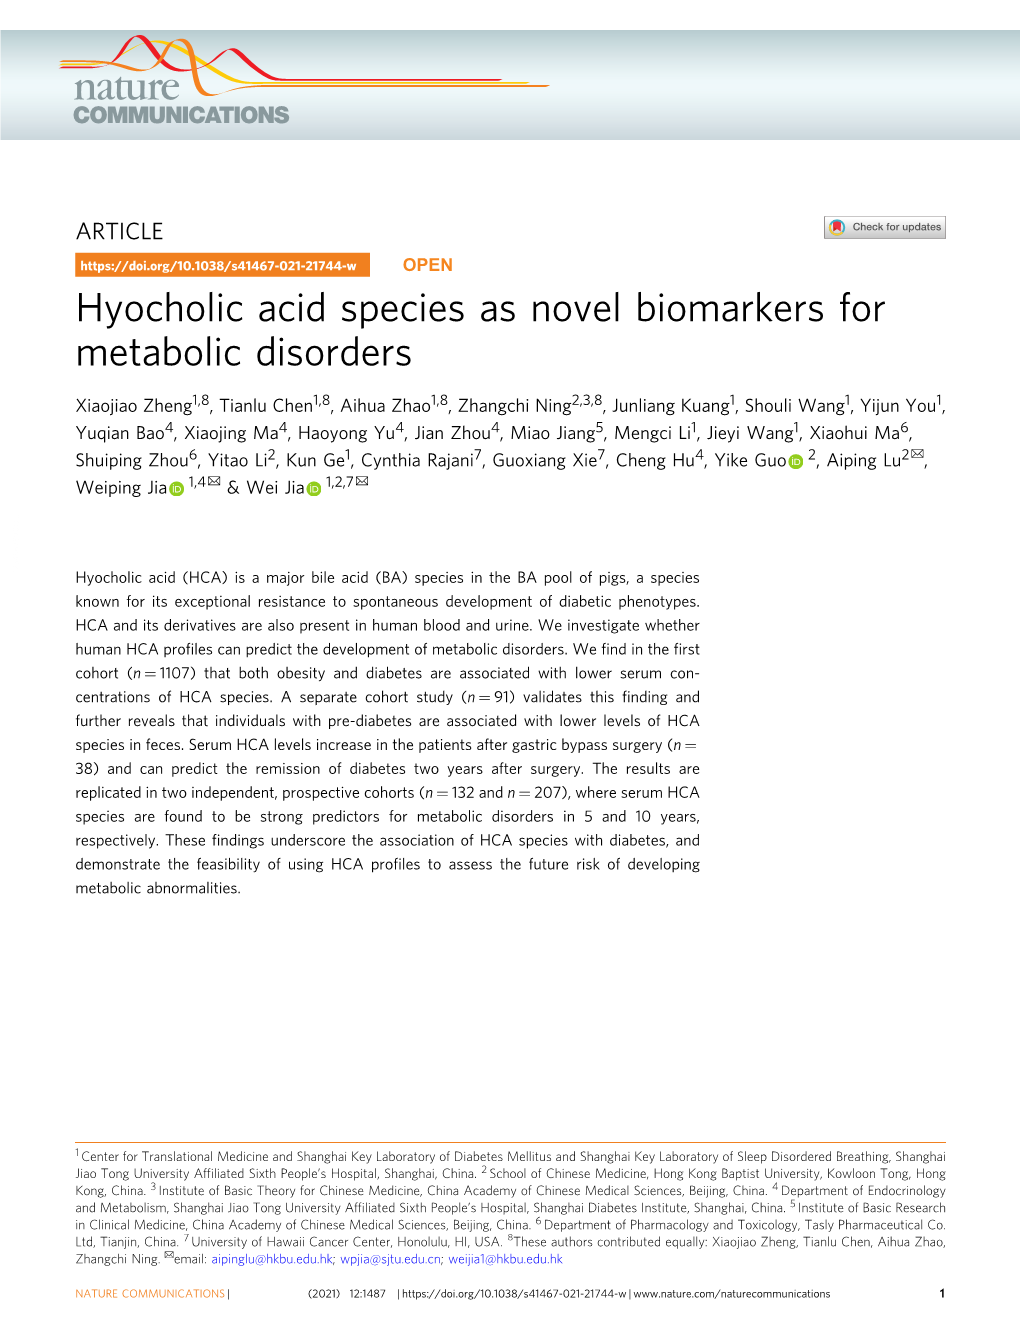 Hyocholic Acid Species As Novel Biomarkers for Metabolic Disorders